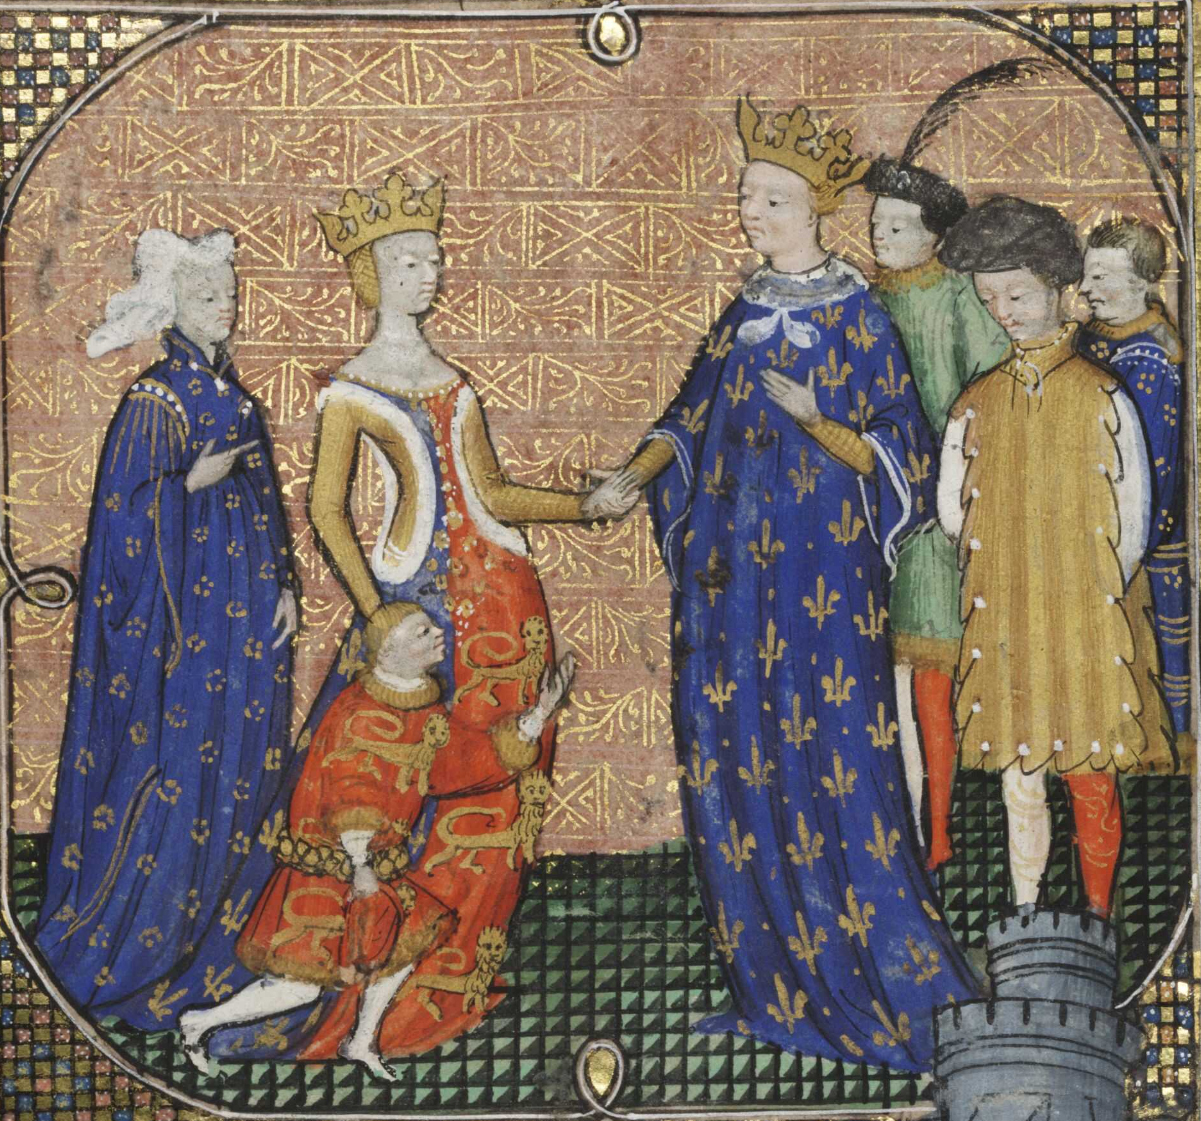 The future Edward III giving homage in 1325 to Charles IV under the guidance of Isabella of France